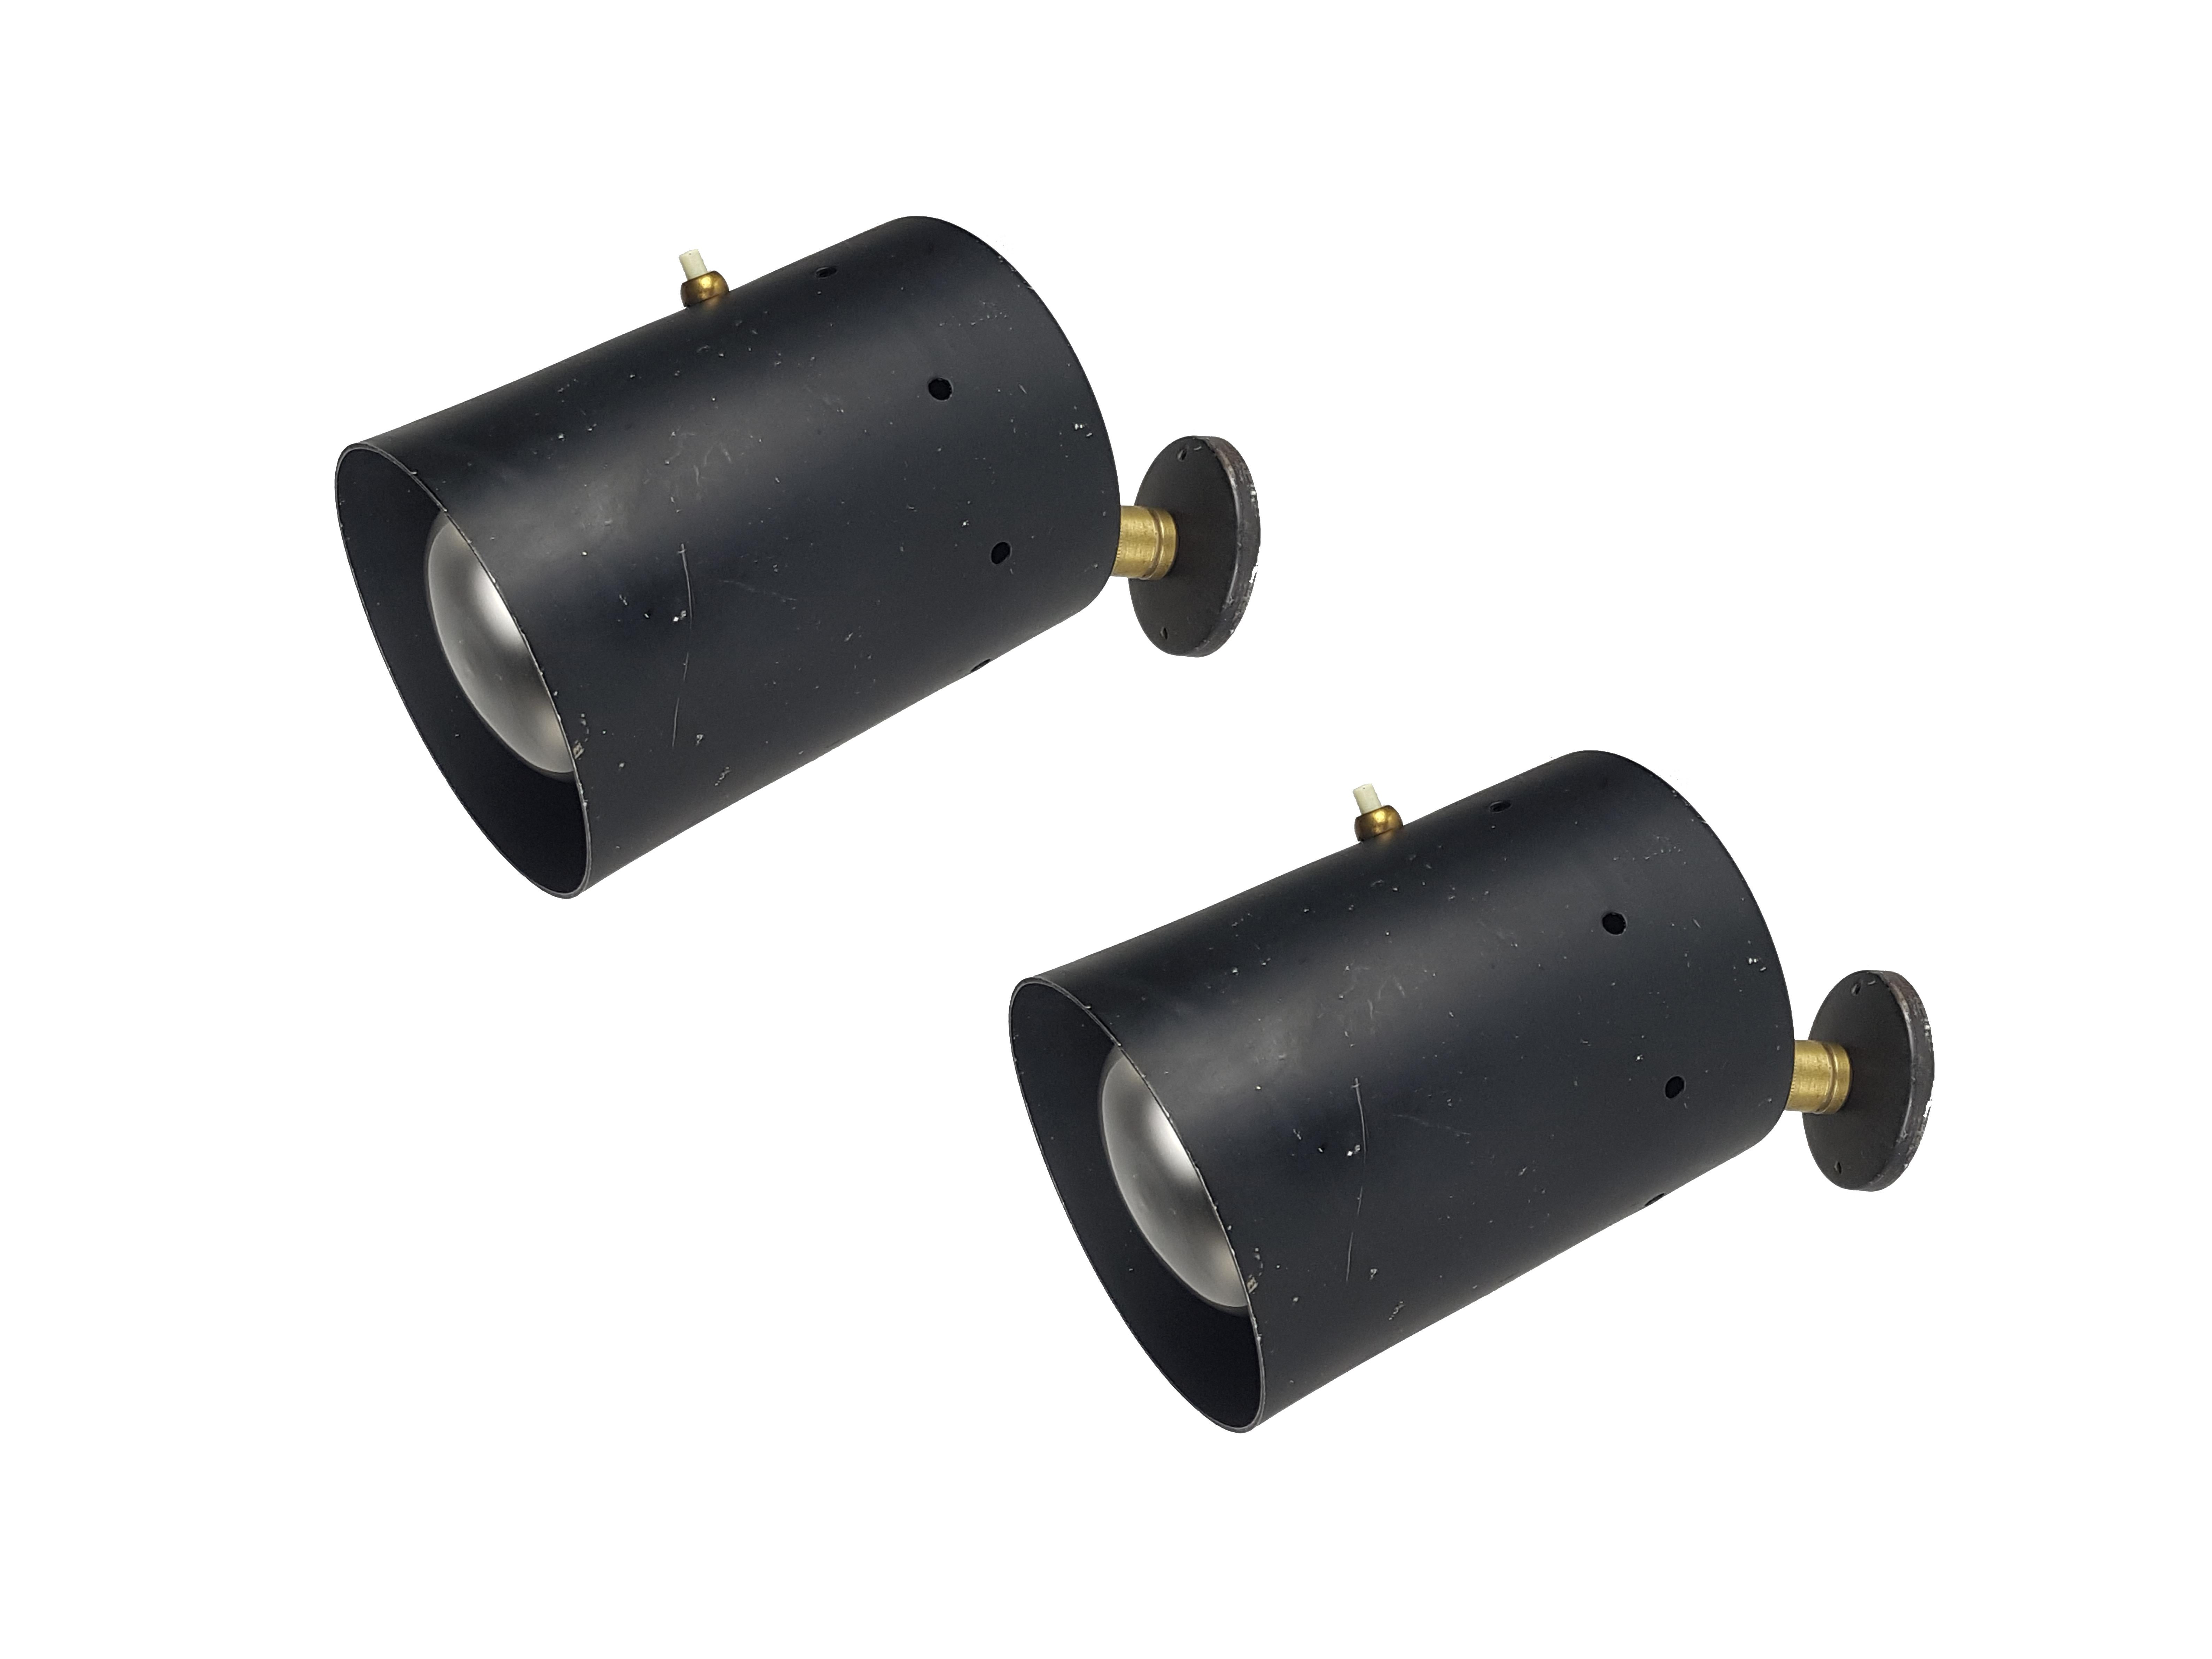 Set of 2 wall lights/spots in black aluminum and brass joint. Pretty good condition: visible signs of wear and paint defects.
Probable lack of a brass ring around the switch